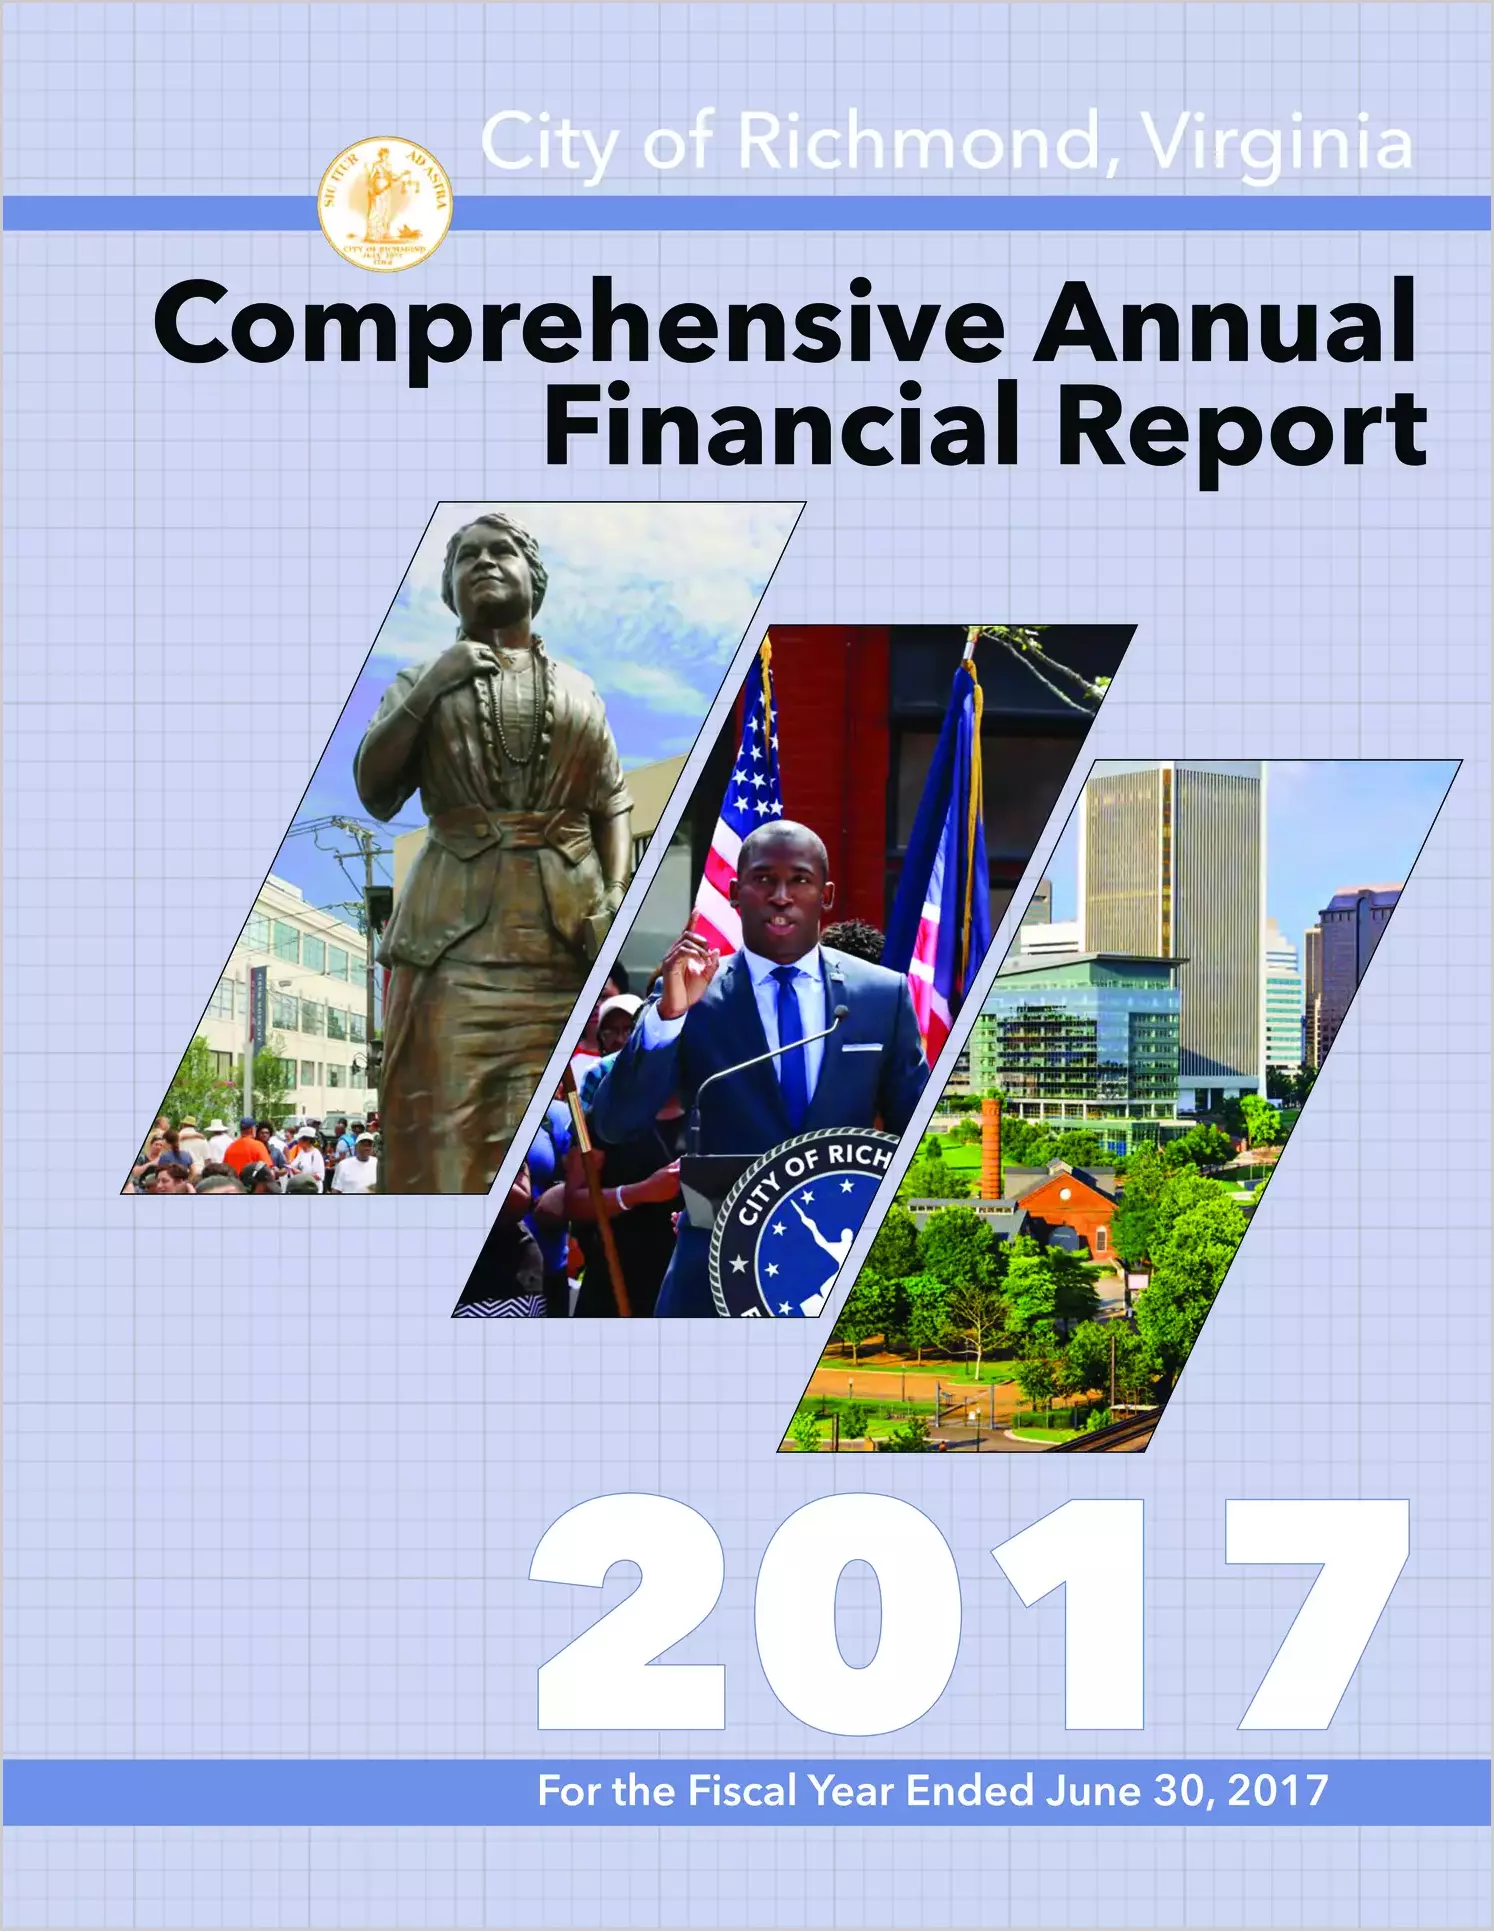 2017 Annual Financial Report for City of Richmond